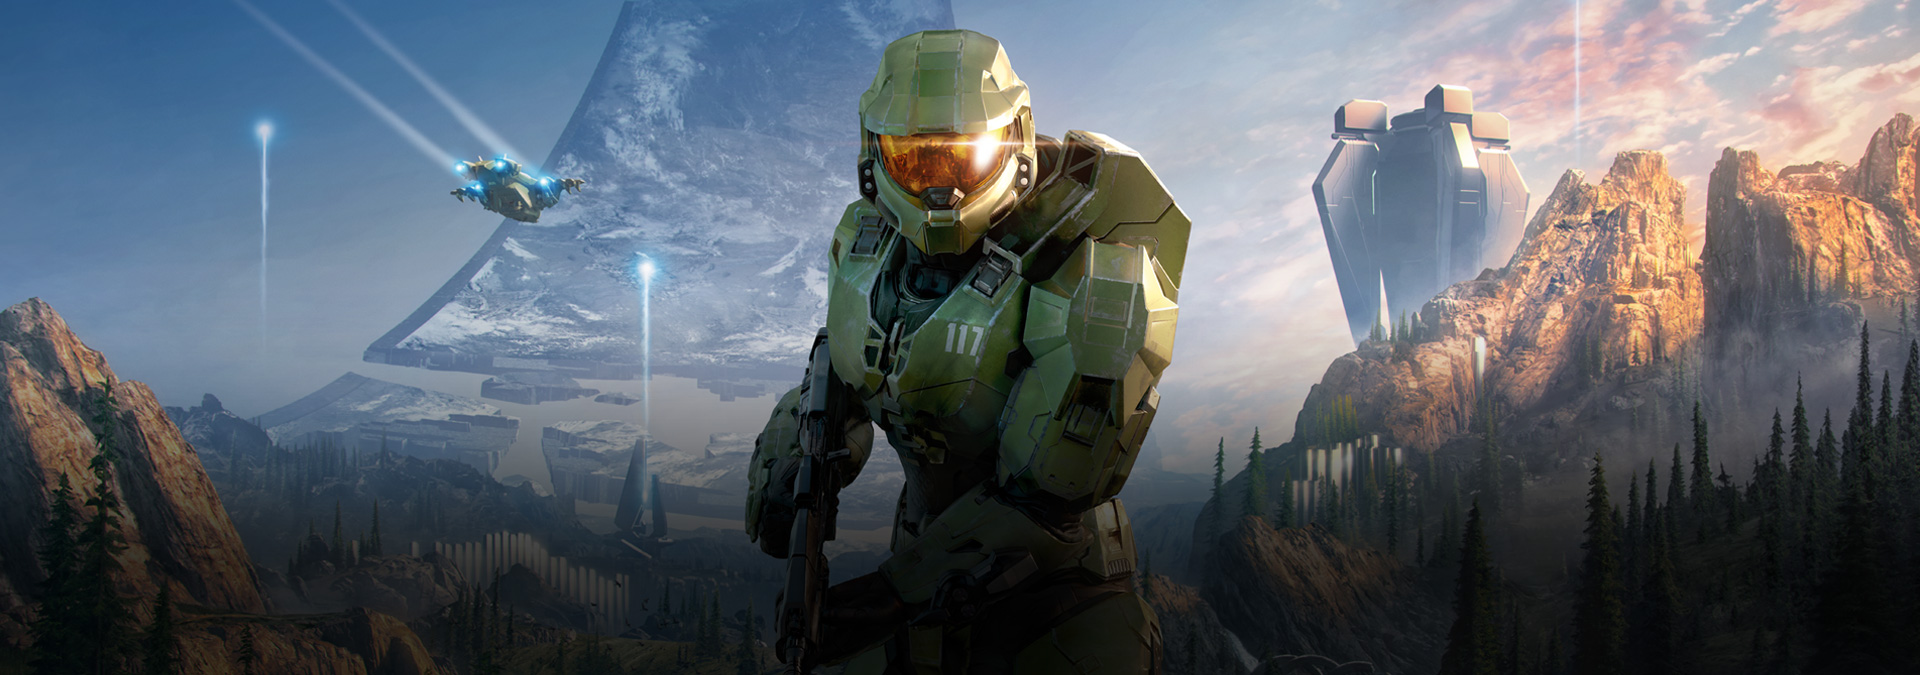 Halo - Official Site